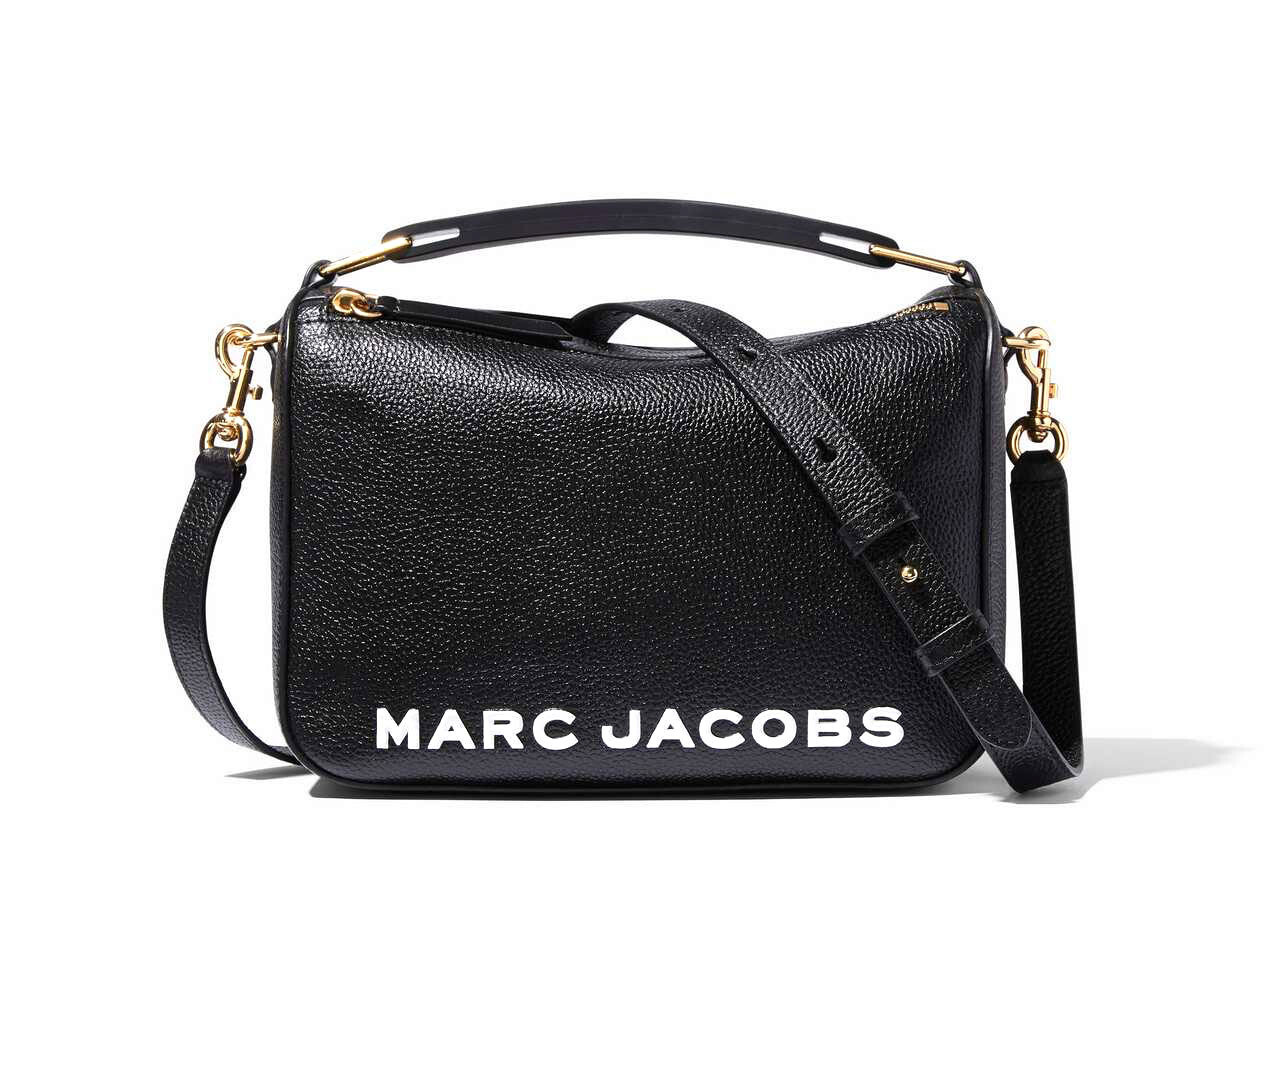 The Softbox | THE MARC JACOBS